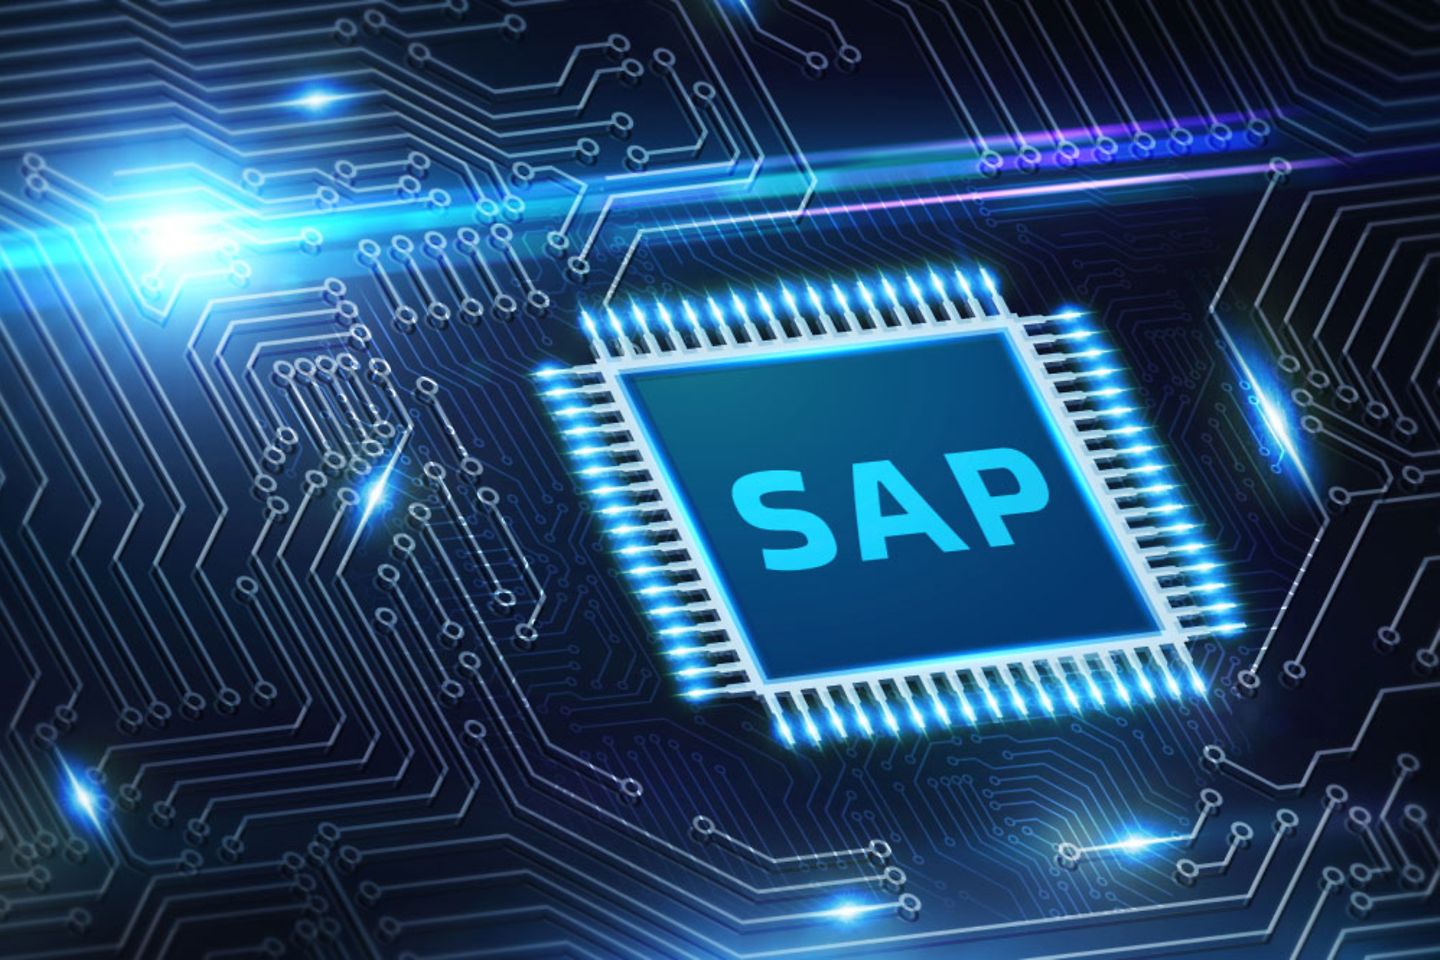 A processor with an SAP logo and blue highlights